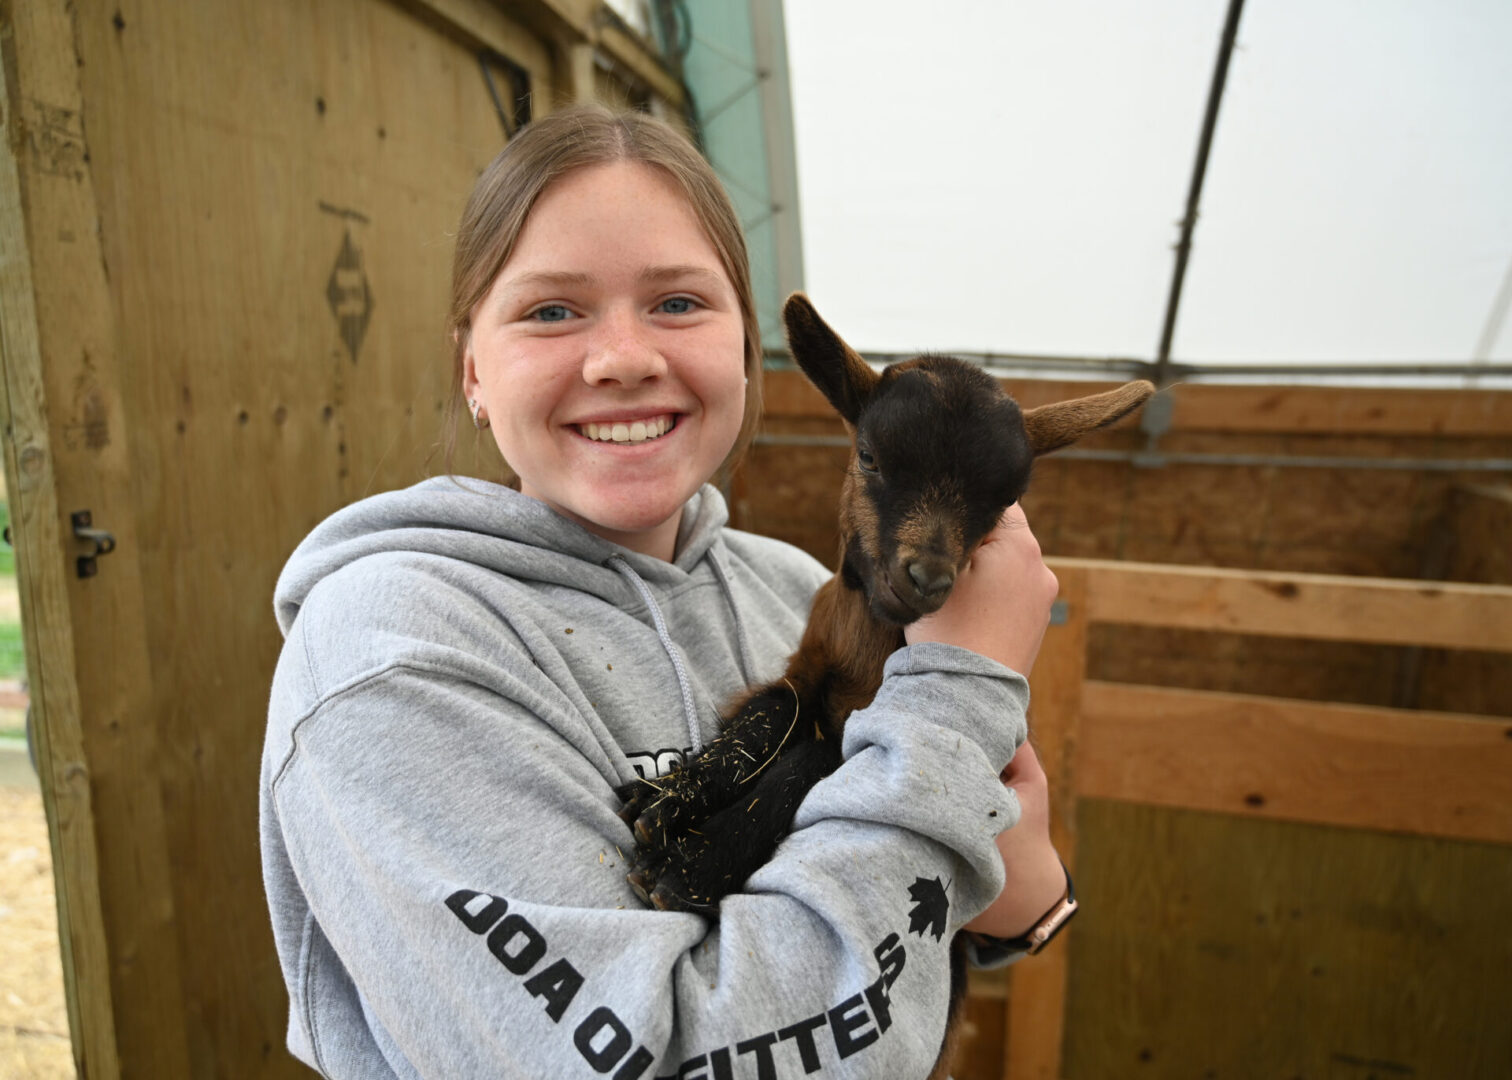 A girl holding a baby goat in her arms.